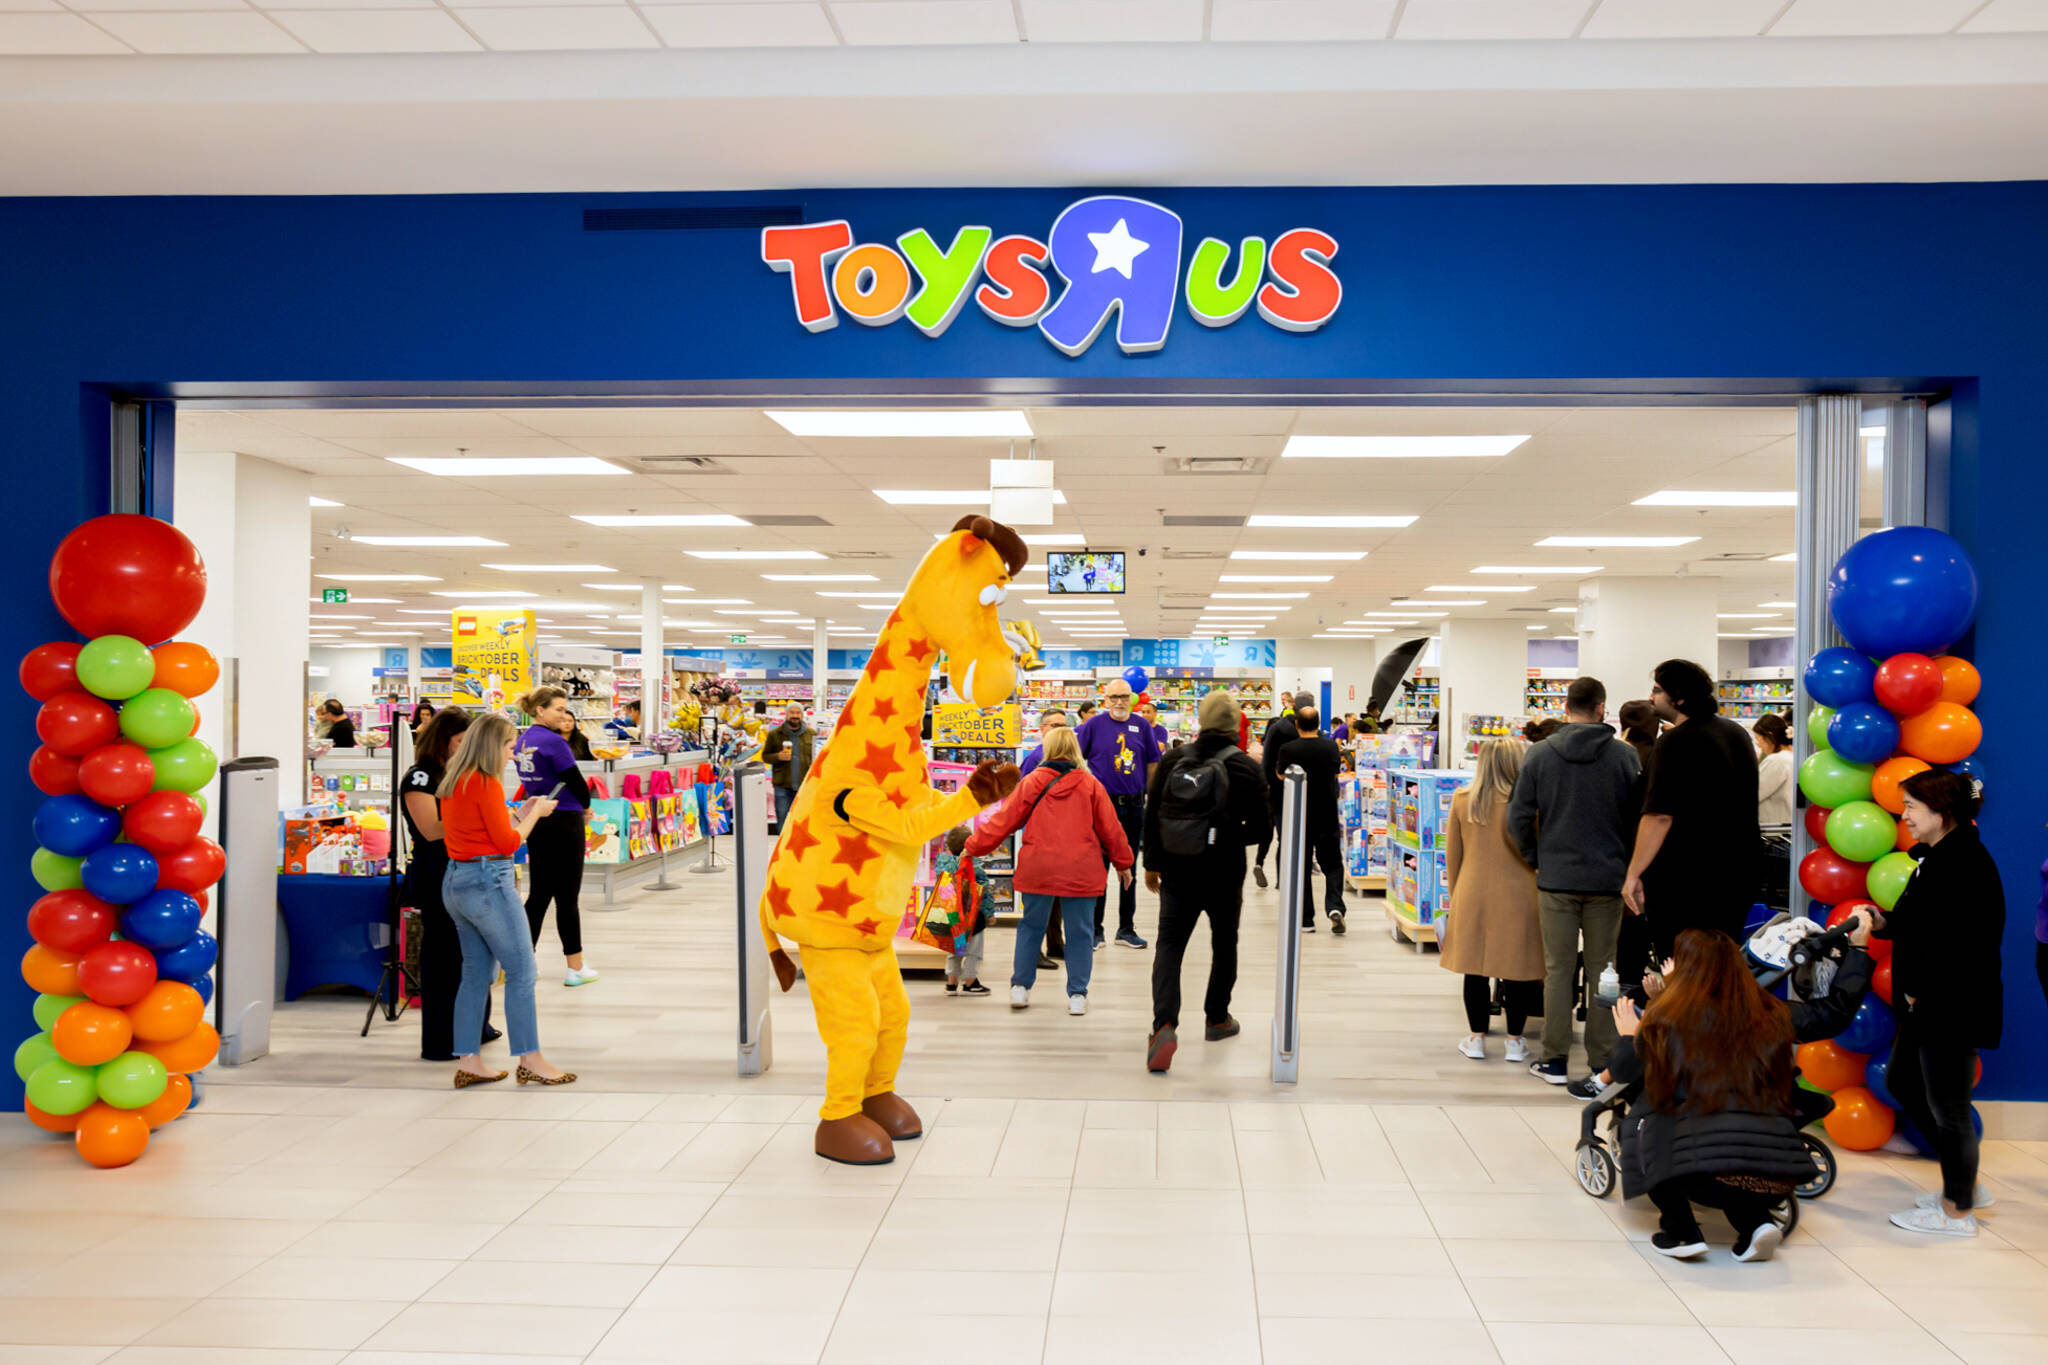 ToysRUs Canada opened a new store in Toronto just in time for